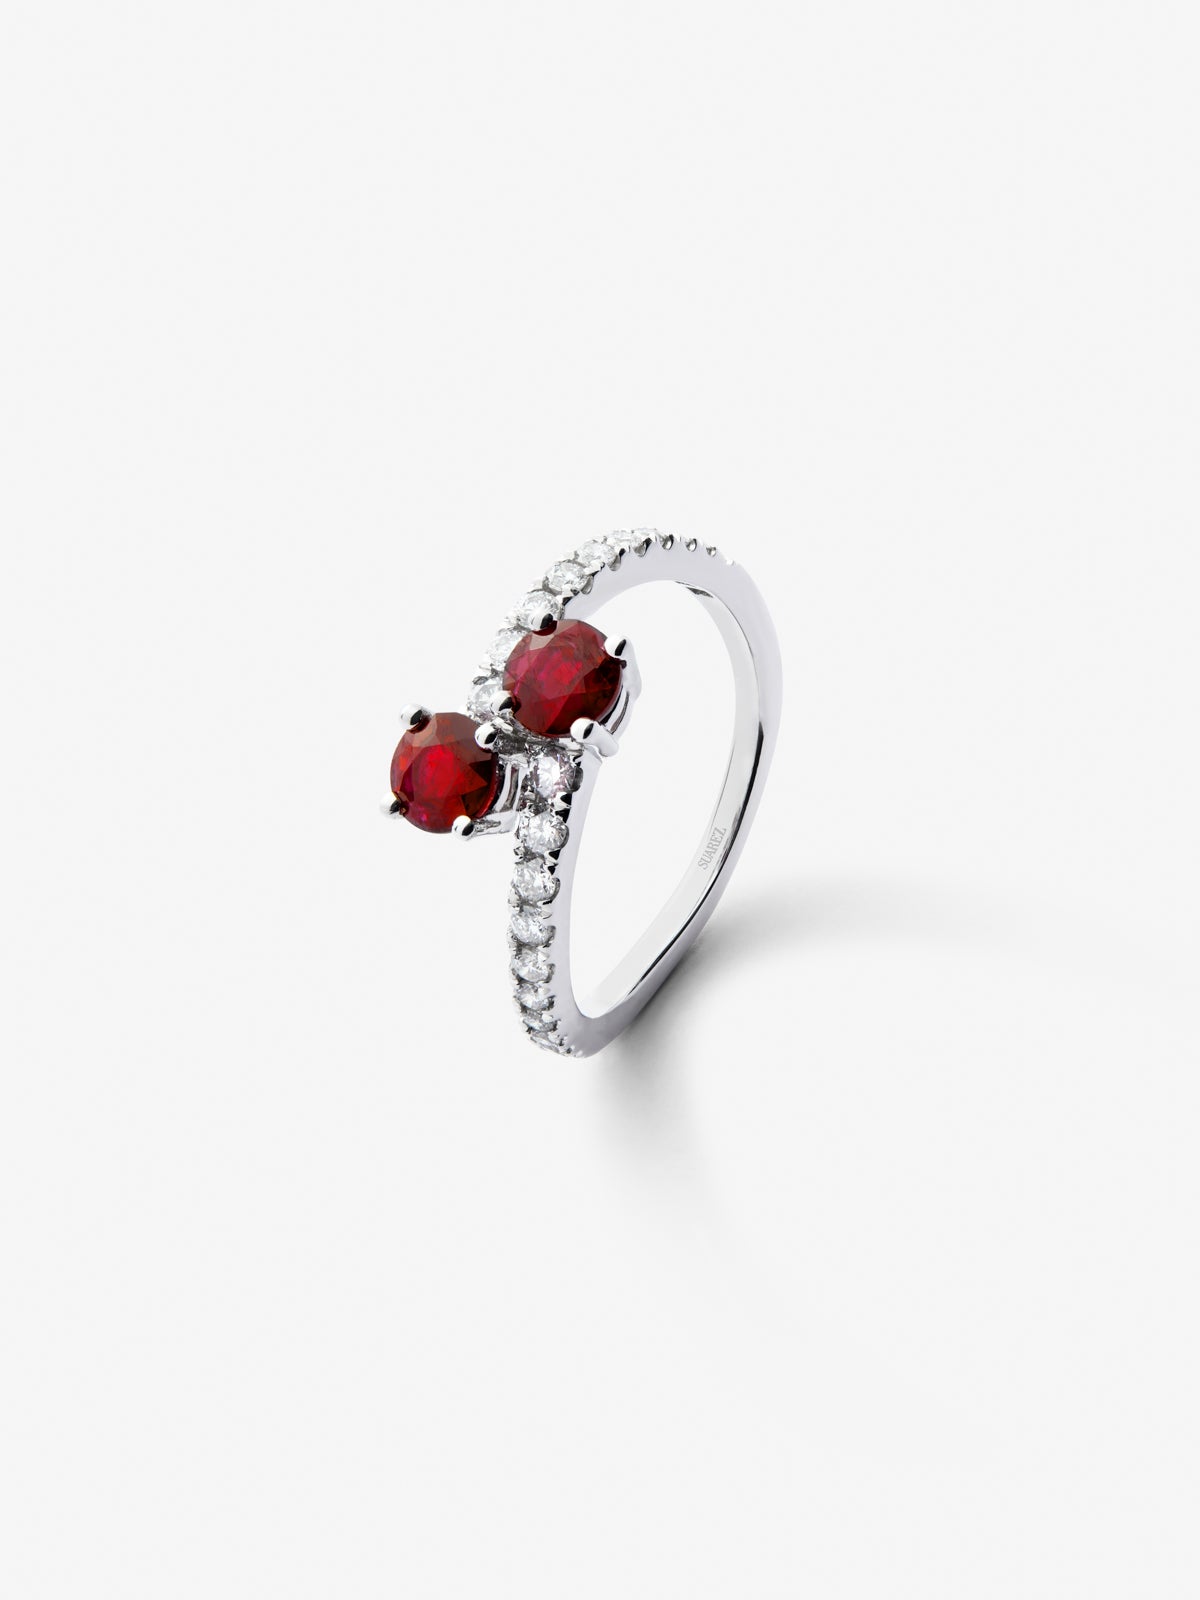 You and I 18k White Gold Ring with Red Rubyes in Bright Size 1.02 cts and White Diamonds in Bright Size of 0.34 CTS